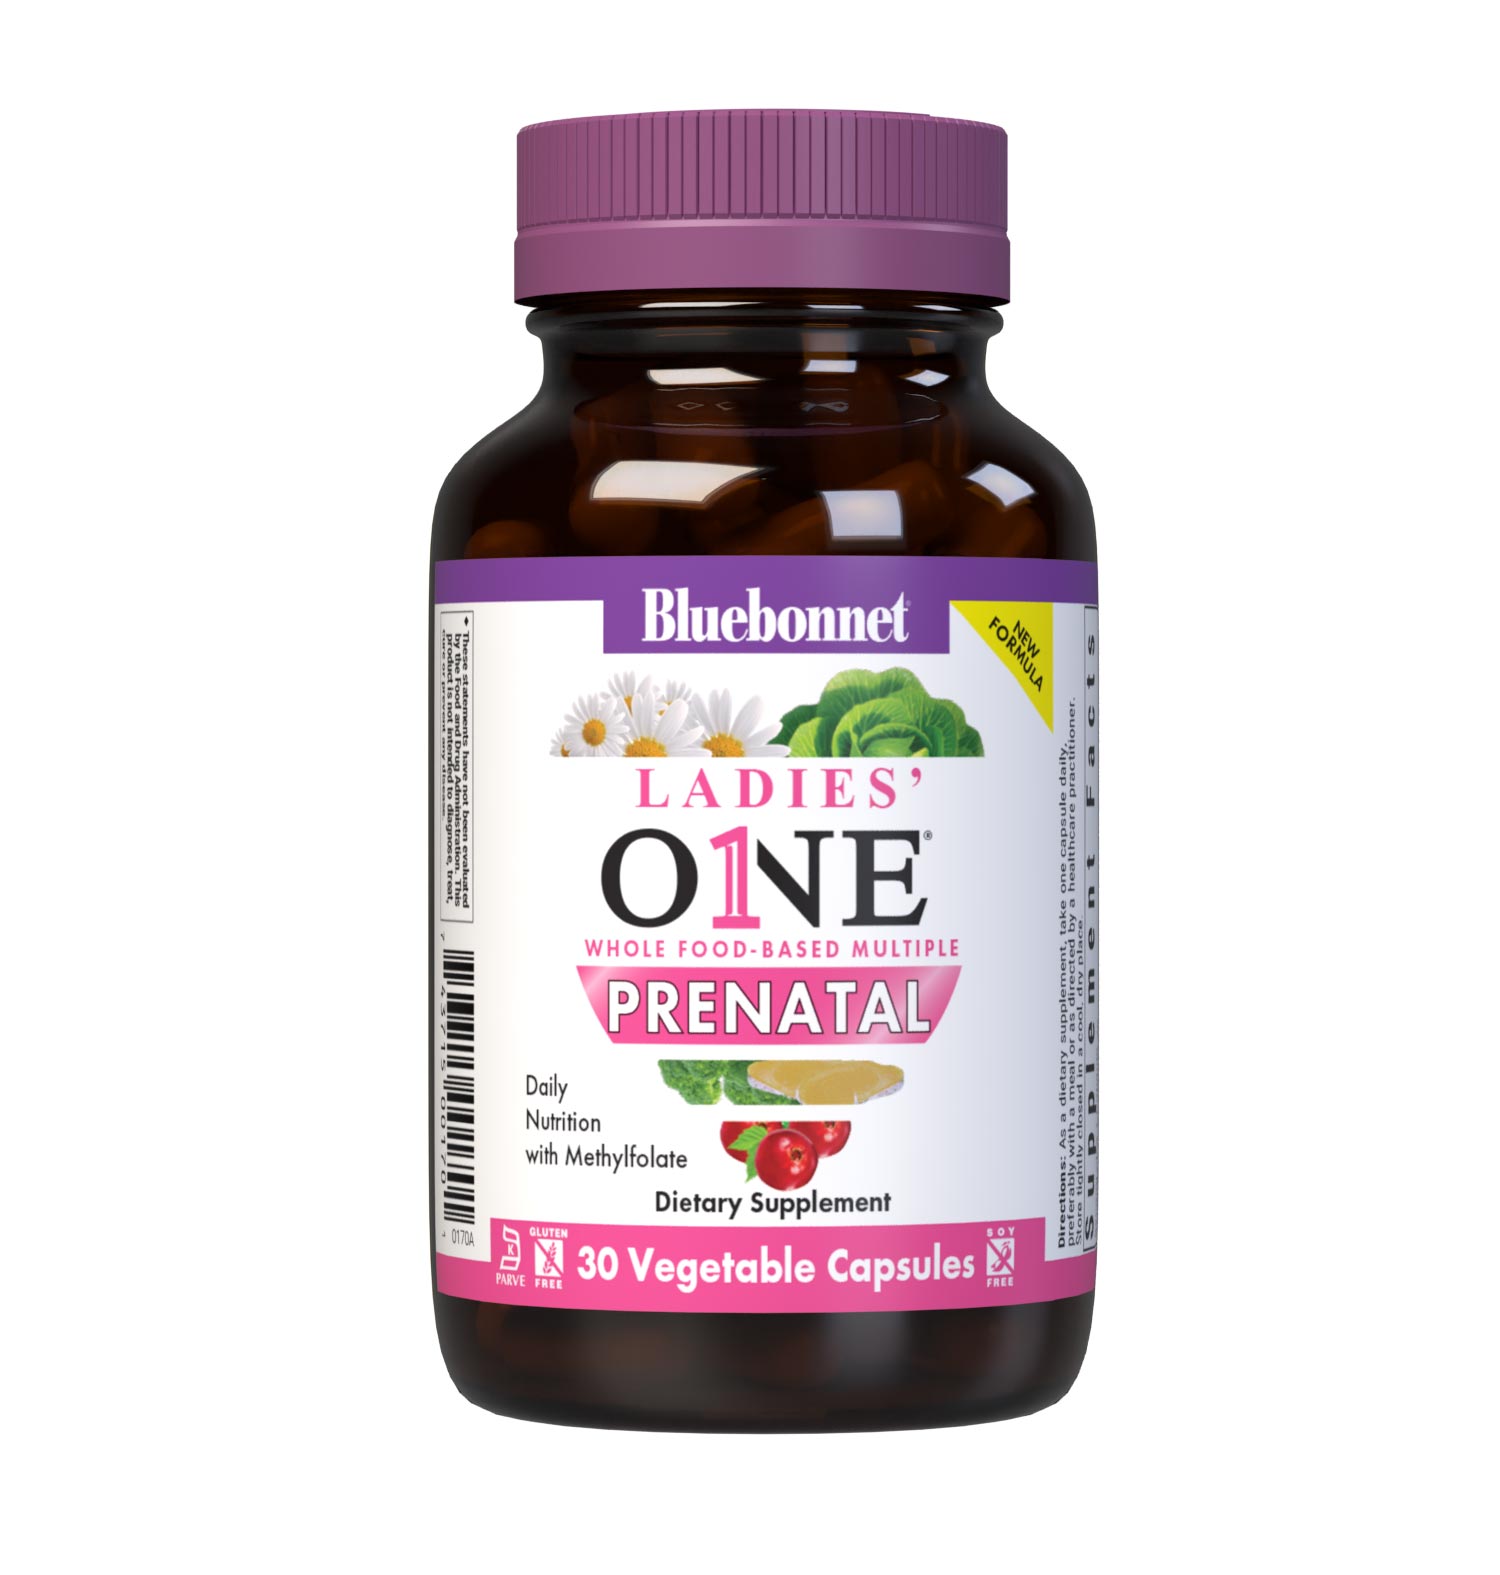 Bluebonnet's Ladies One prenatal whole food-based multiple 30 vegetable capsules is formulated with highly bioavailable non-GMO ingredients such as active coenzyme forms of B vitamins, vitamin K2, vitamin E from sunflower along with sustainably harvested and wildcrafted herbs, superfruits and vegetables. #size_30 count